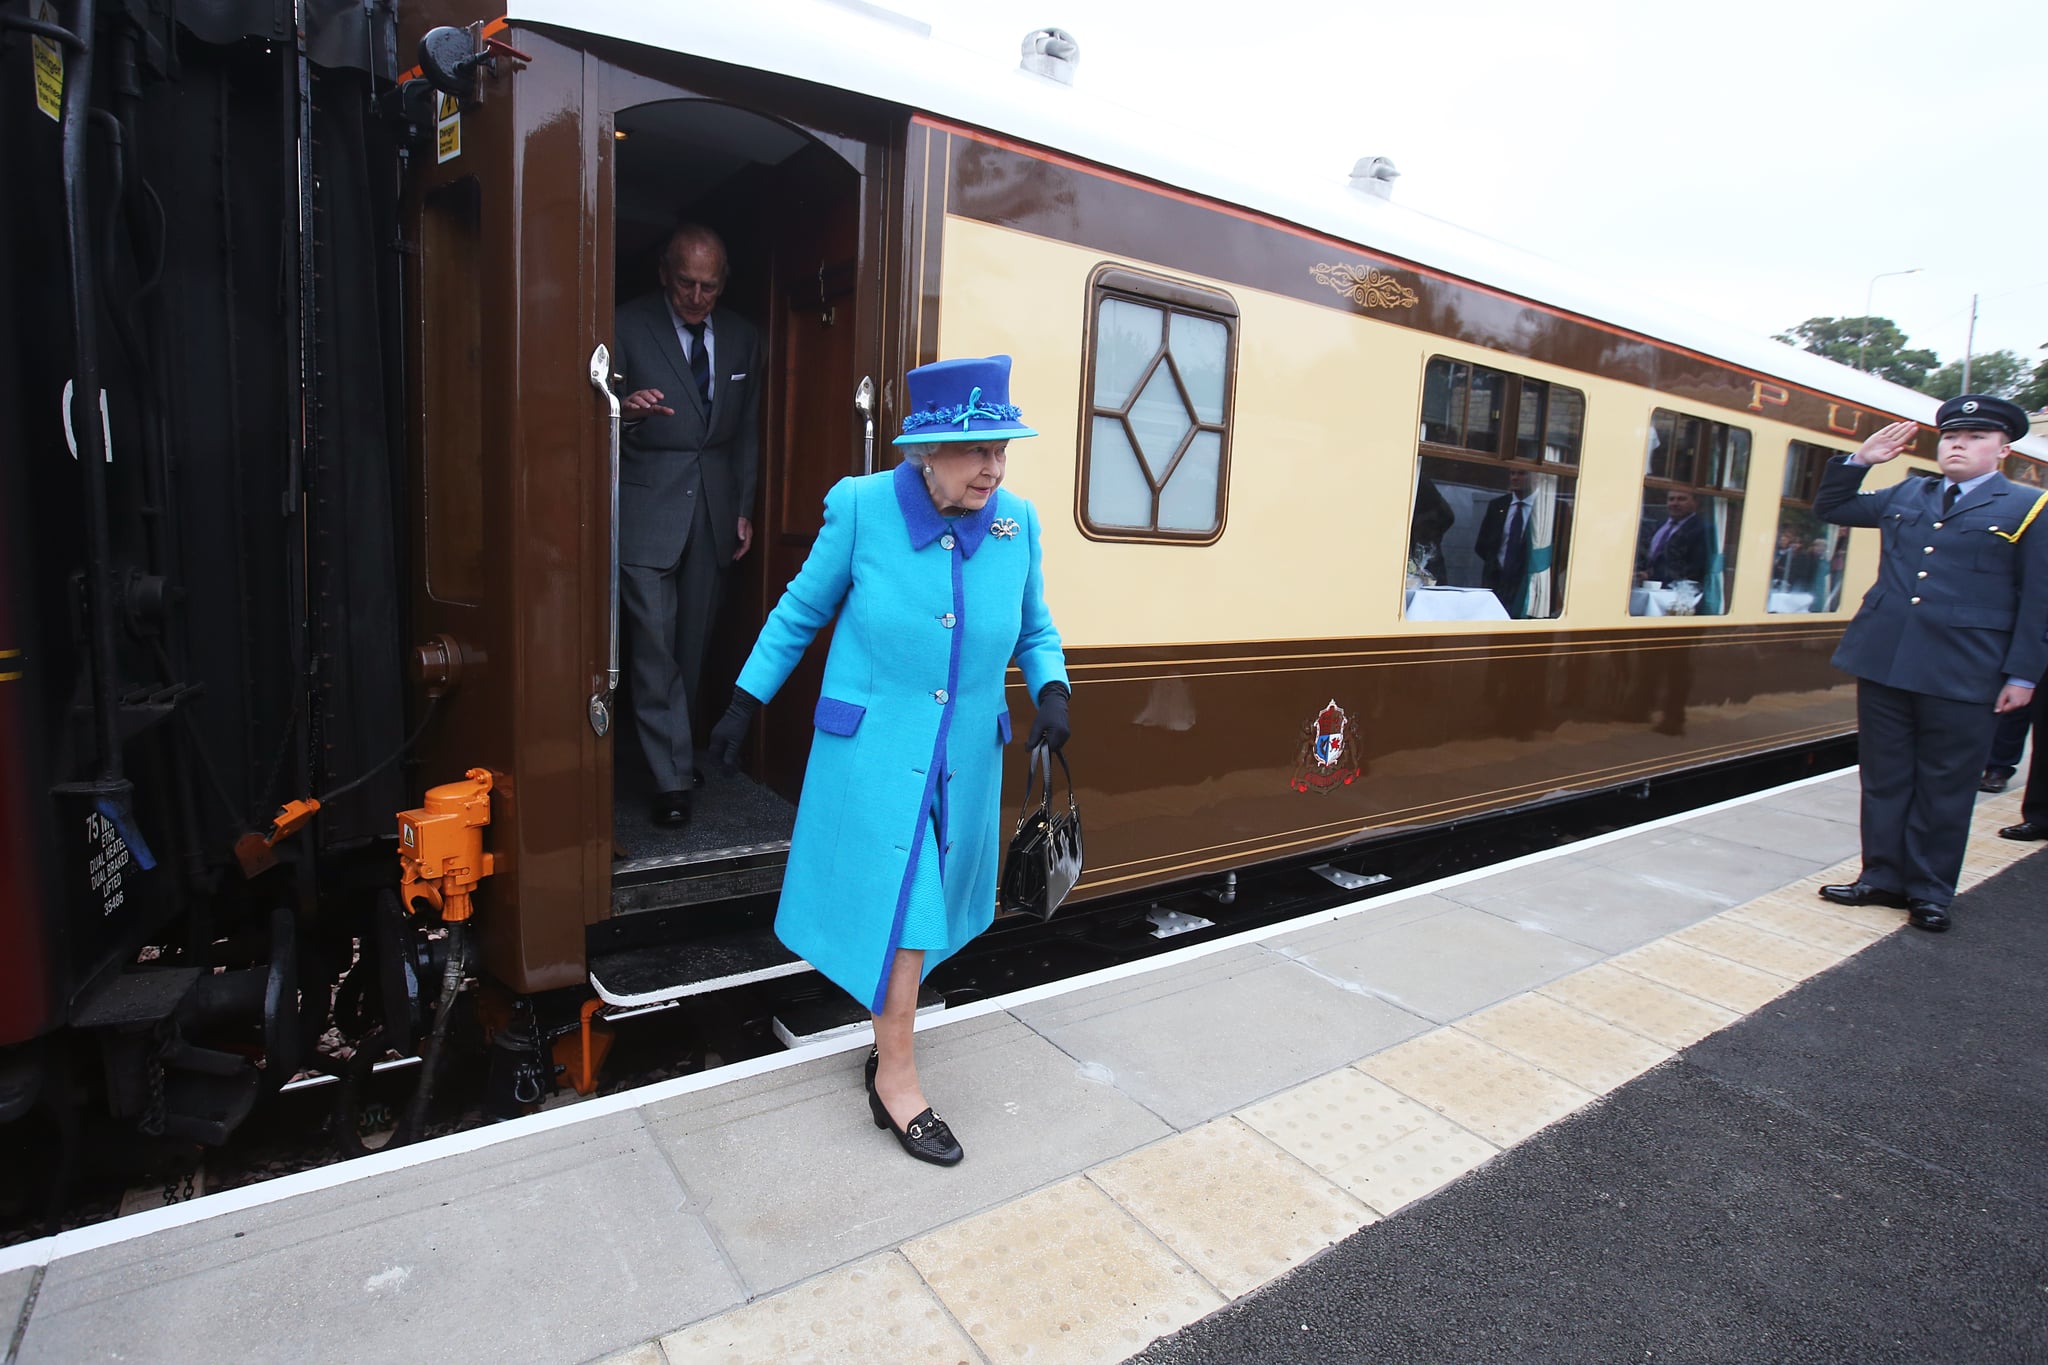 NEWTONGRANGE, SCOTLAND - SEPTEMBER 09:  Queen Elizabeth II arrives to greet well-wishers before she unveils a commemorative plaque at Newtongrange railway station on board the steam locomotive